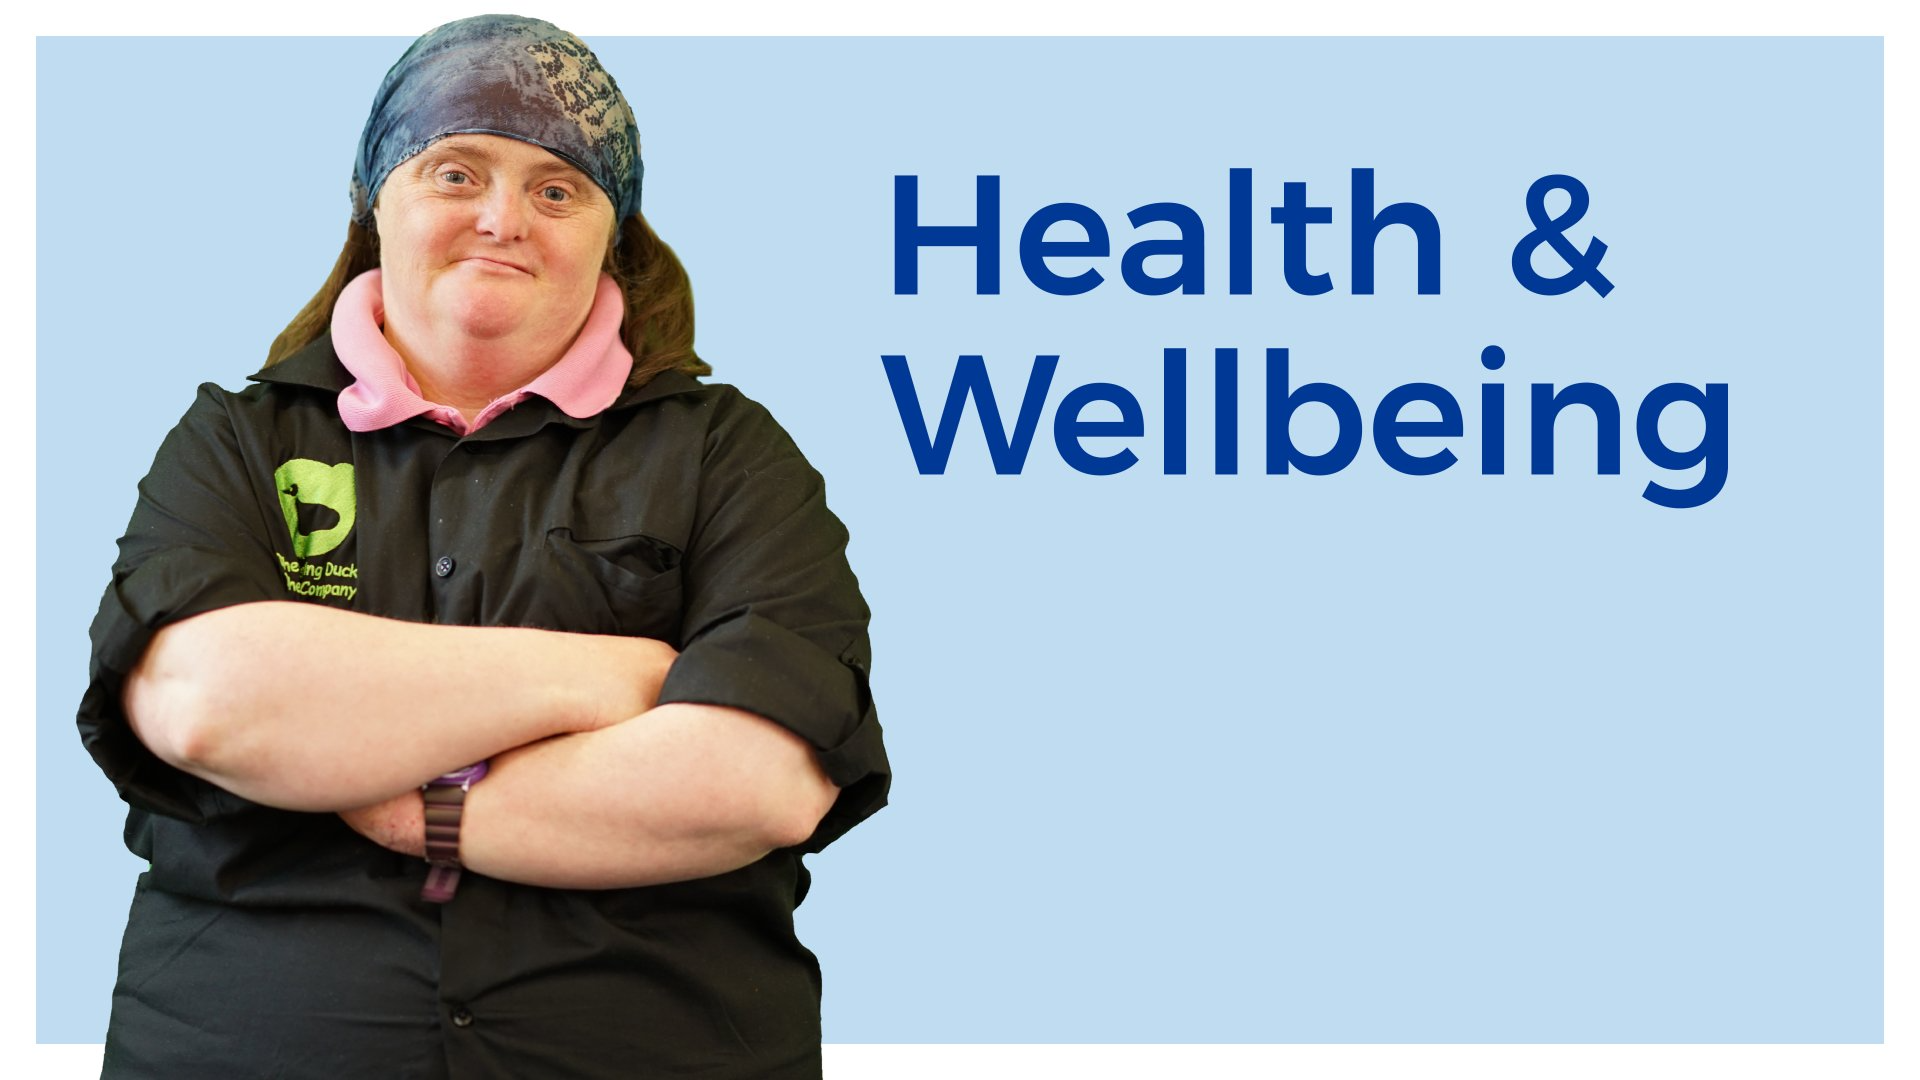 Words saying health and wellbeing with a smiling woman wearing a headscarf next to the words